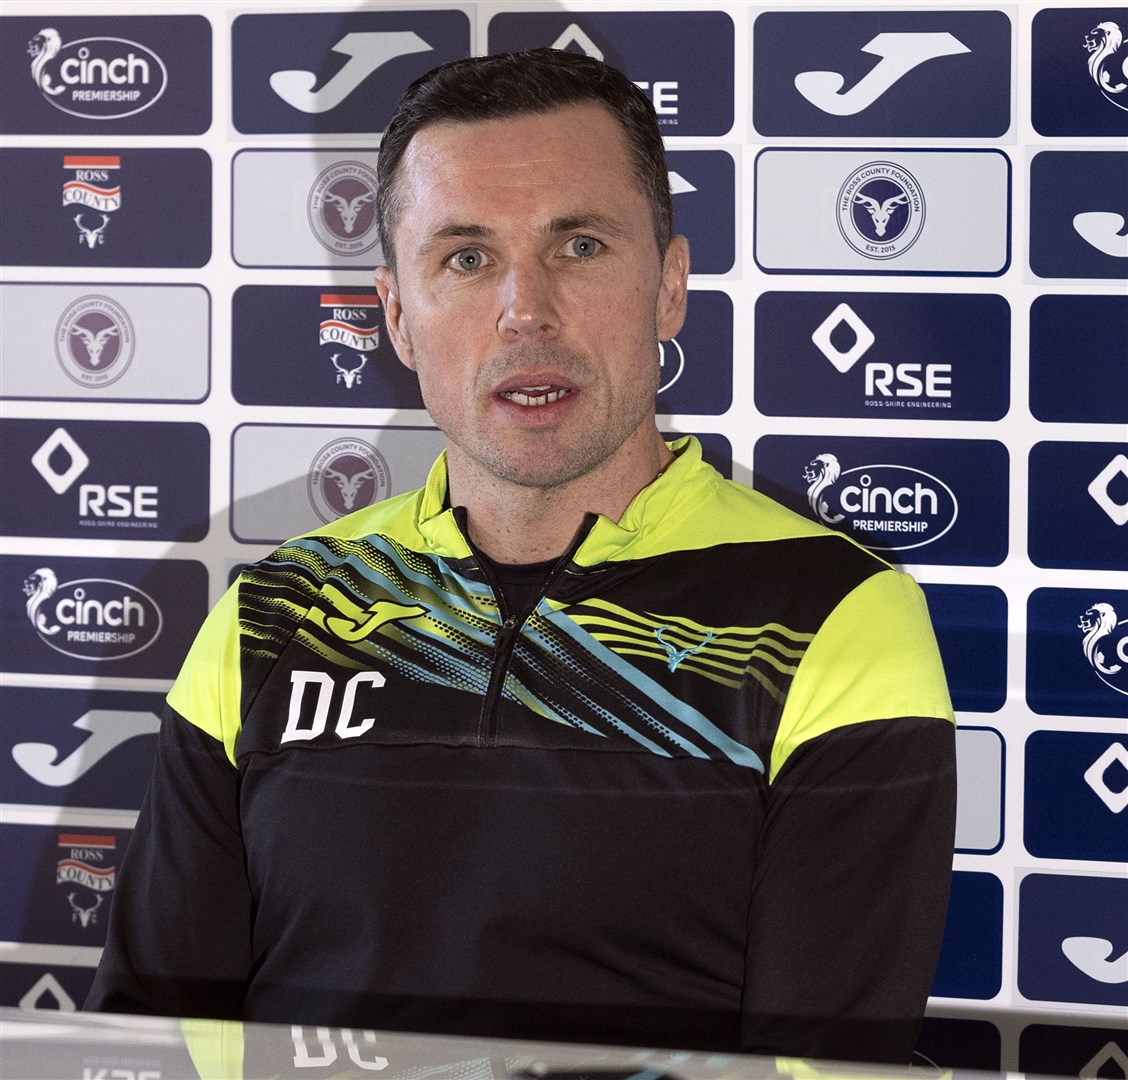 Ross County interim manager Don Cowie, speaking to the media earlier today, paid warm tribute to Donald Munro, adding: 'We’re thinking of his family at this difficult time.' Picture: Ken Macpherson